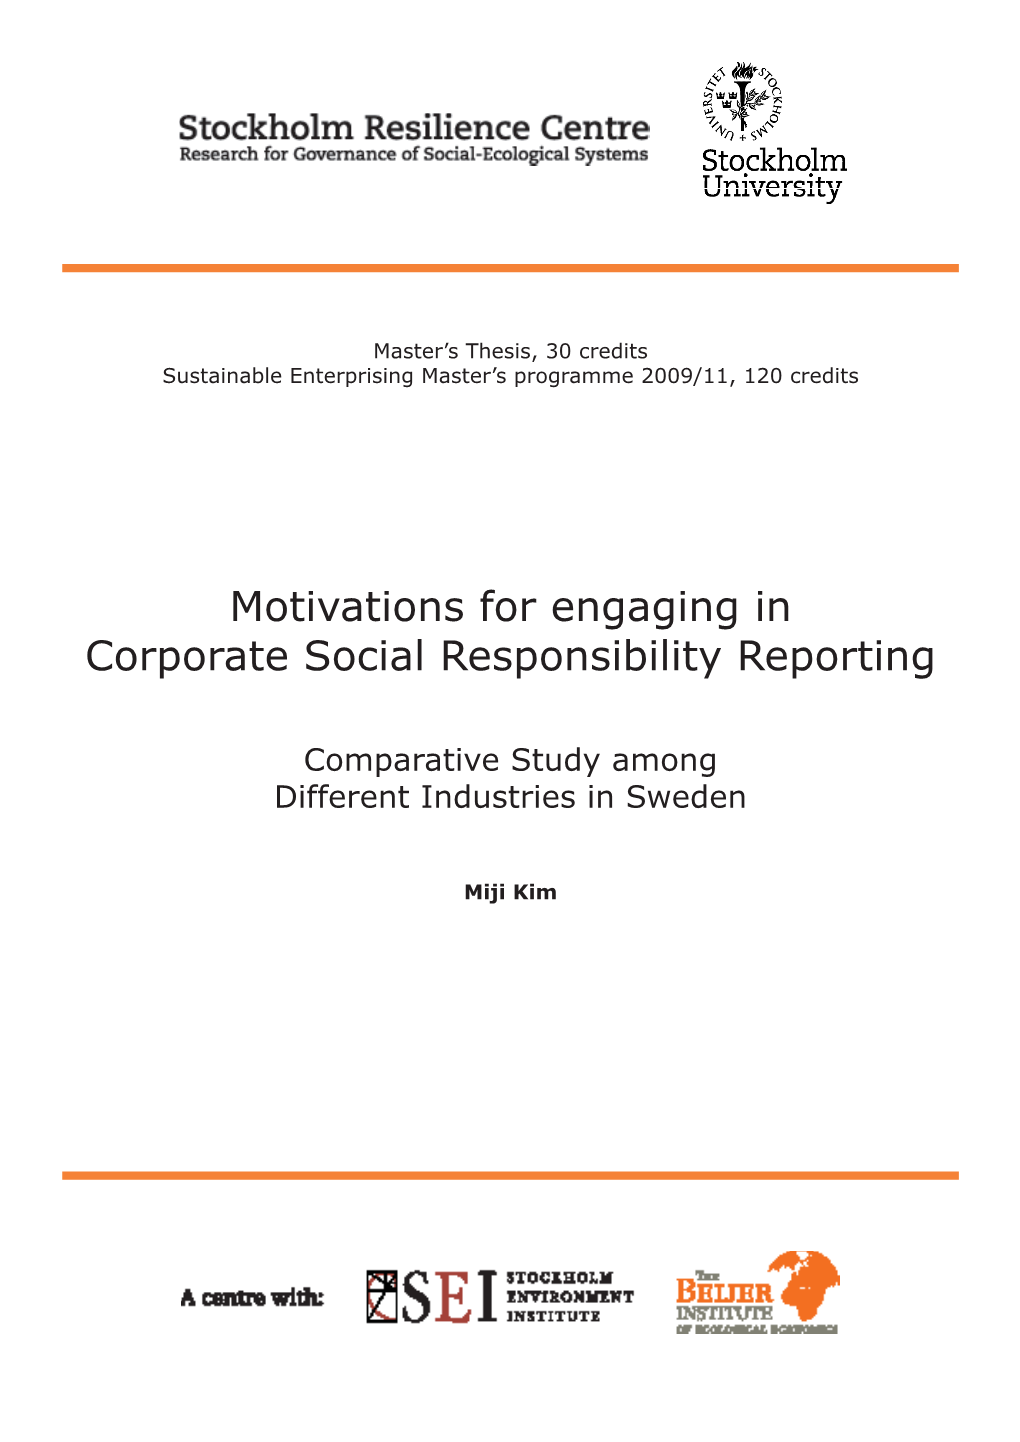 Motivations for Engaging in Corporate Social Responsibility Reporting